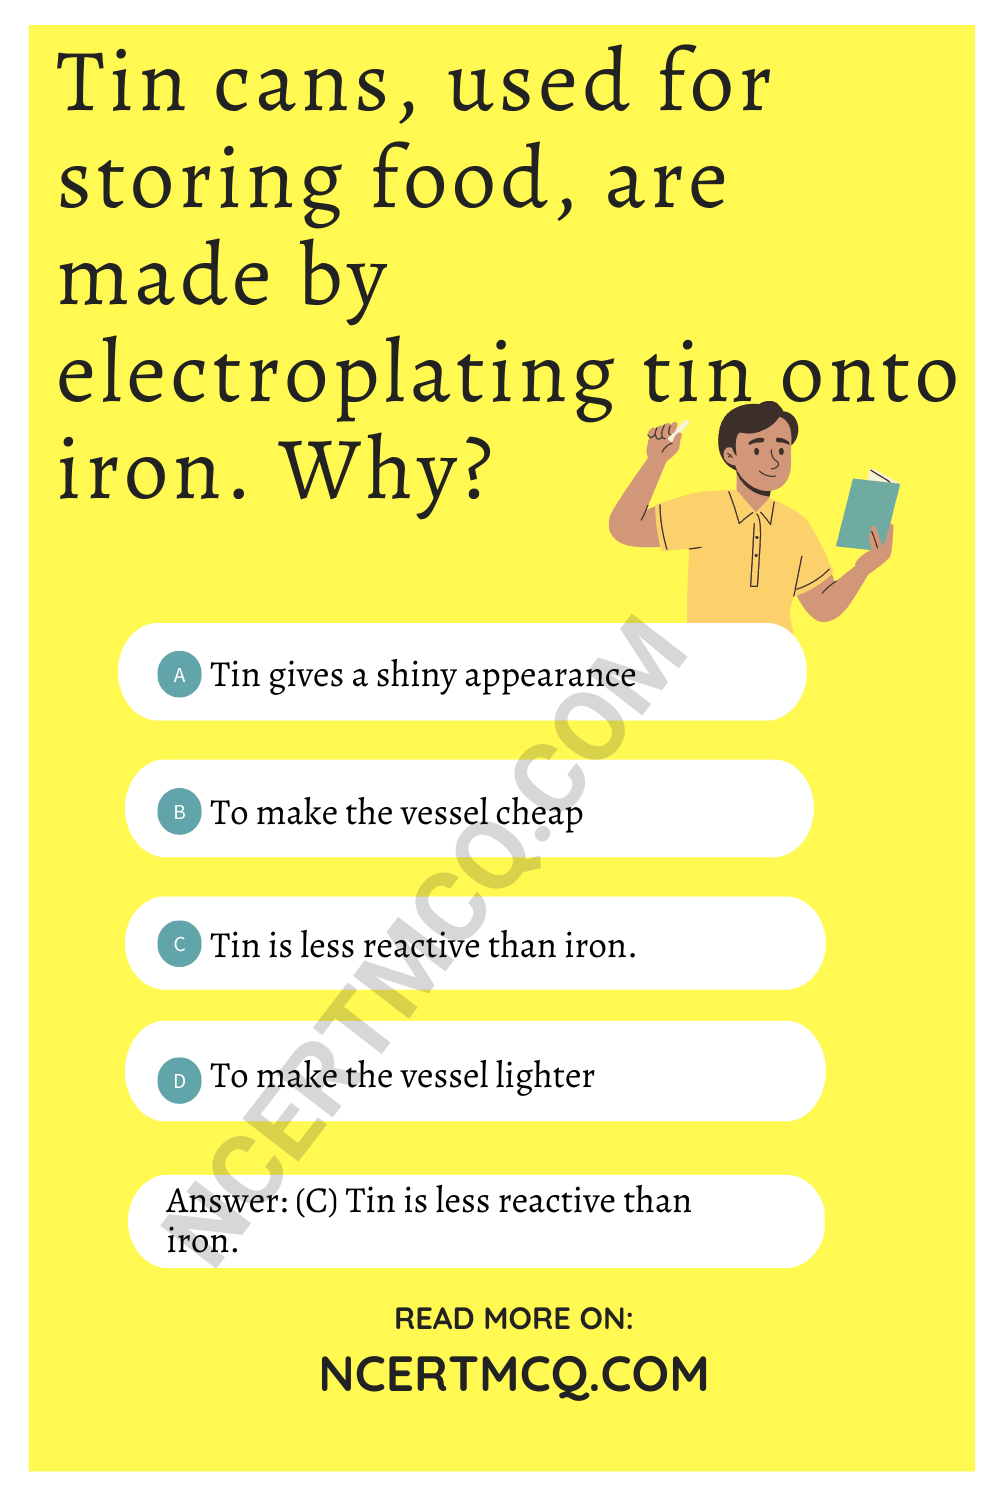 Tin cans, used for storing food, are made by electroplating tin onto iron. Why?